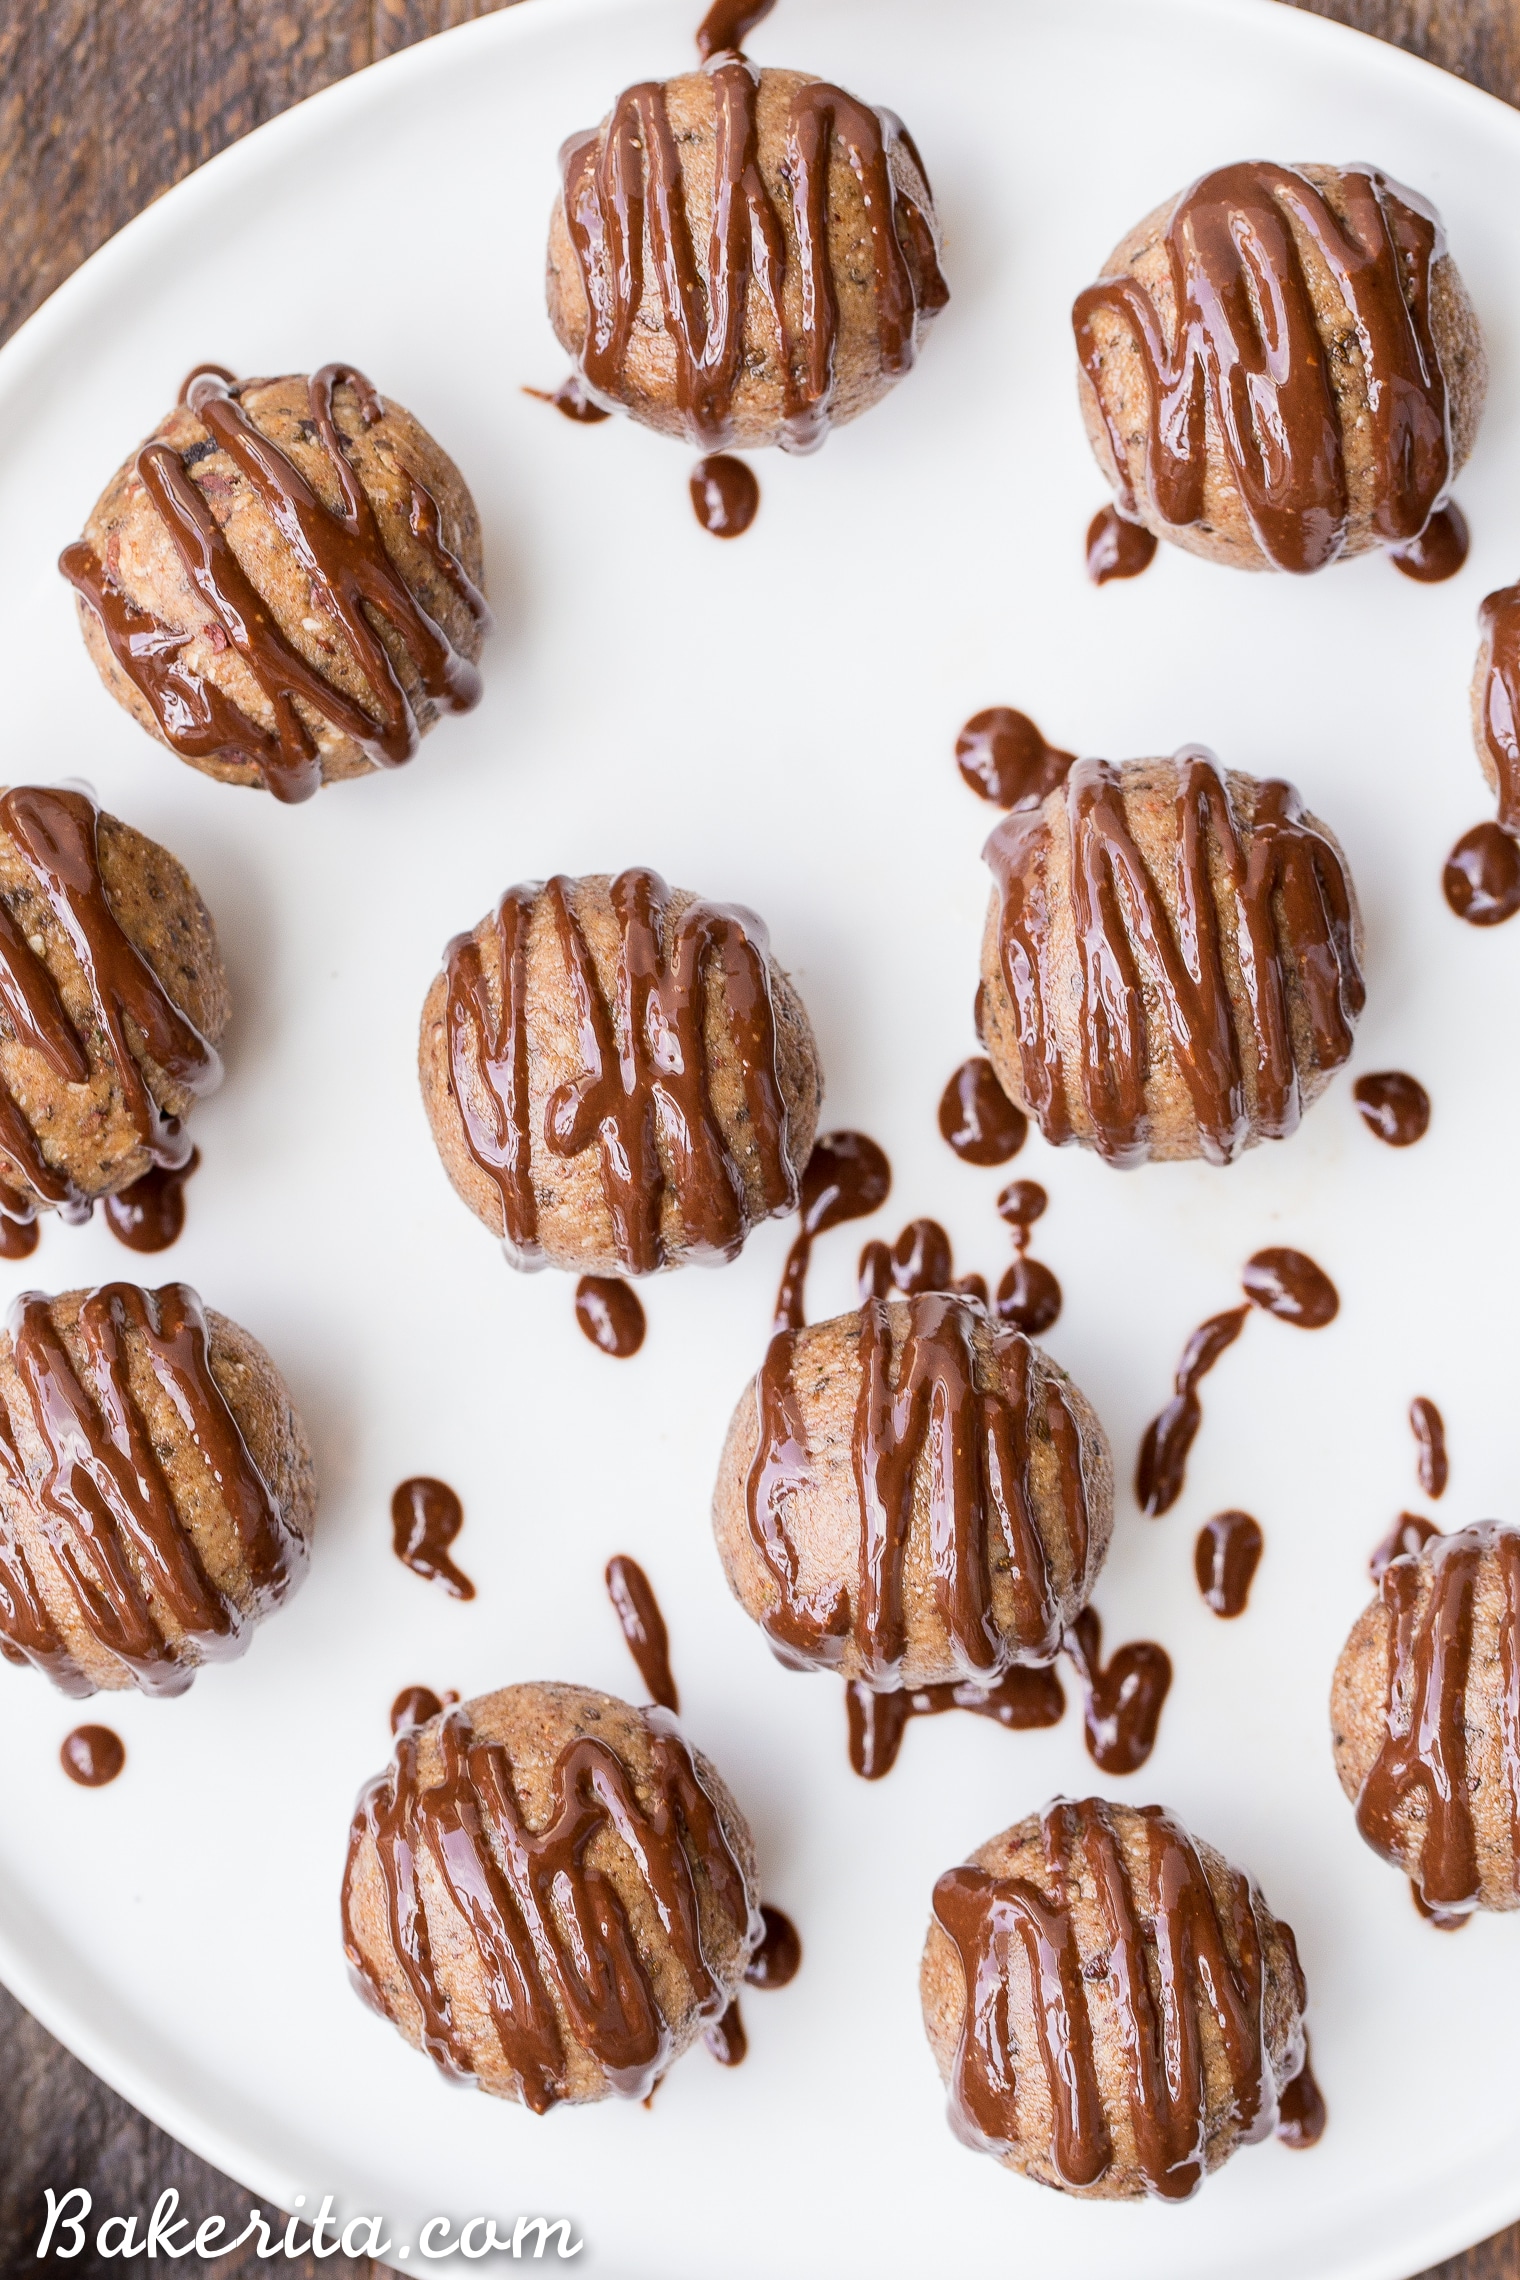 These Nutty Coconut Fat Bombs are an easy-to-make snack that is filling, full of healthy fats, and absolutely delicious! It's a no-bake recipe that's gluten-free, paleo, keto, low carb, Whole30-friendly, and vegan. 